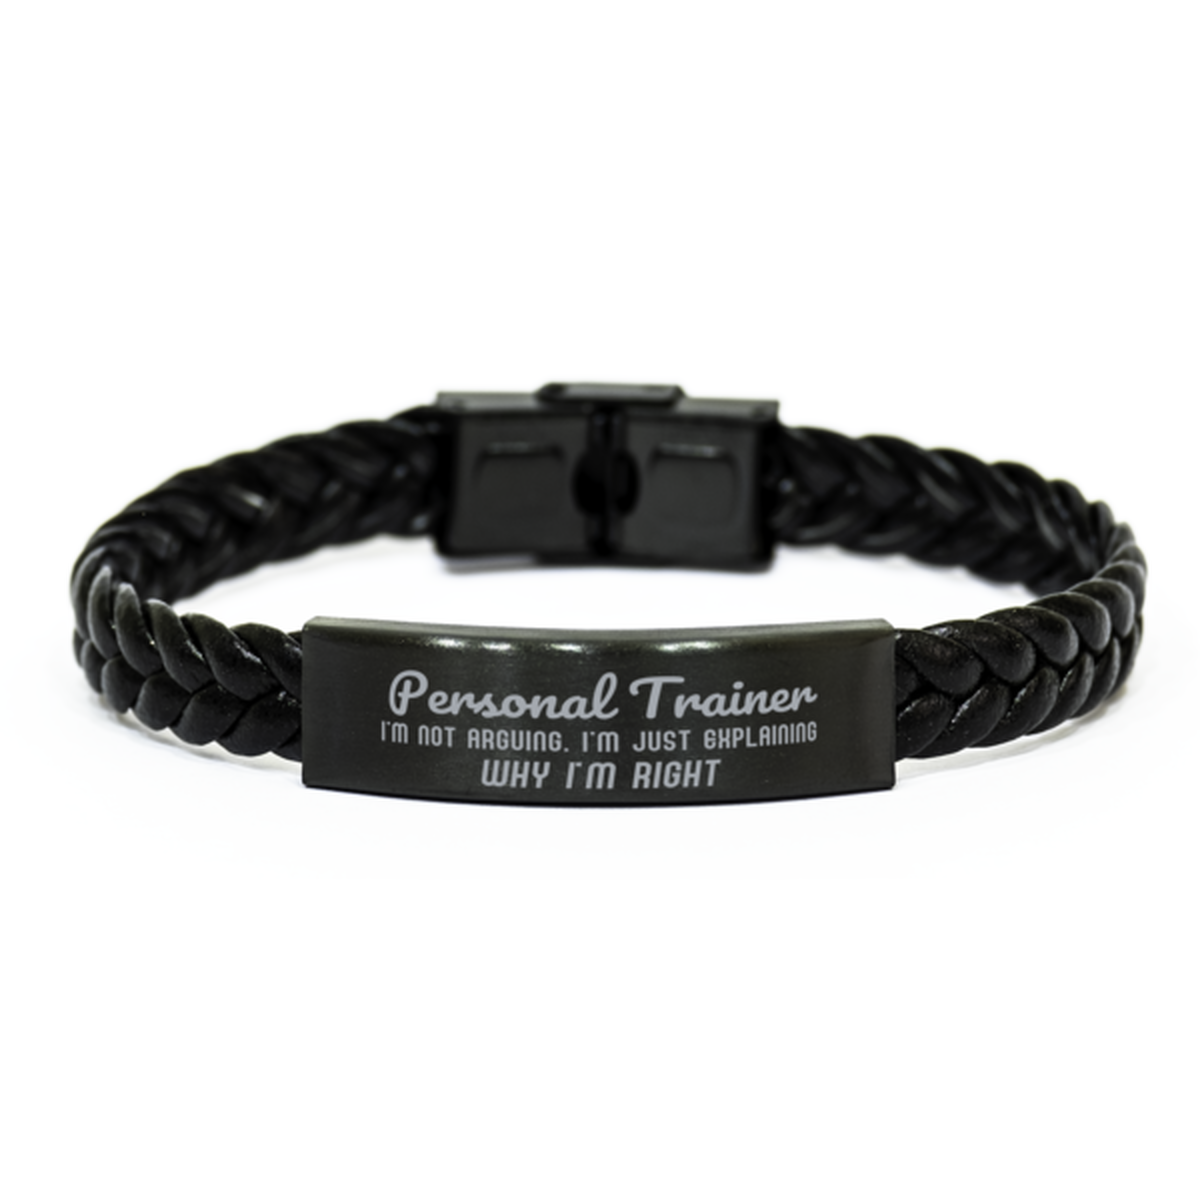 Personal Trainer I'm not Arguing. I'm Just Explaining Why I'm RIGHT Braided Leather Bracelet, Graduation Birthday Christmas Personal Trainer Gifts For Personal Trainer Funny Saying Quote Present for Men Women Coworker